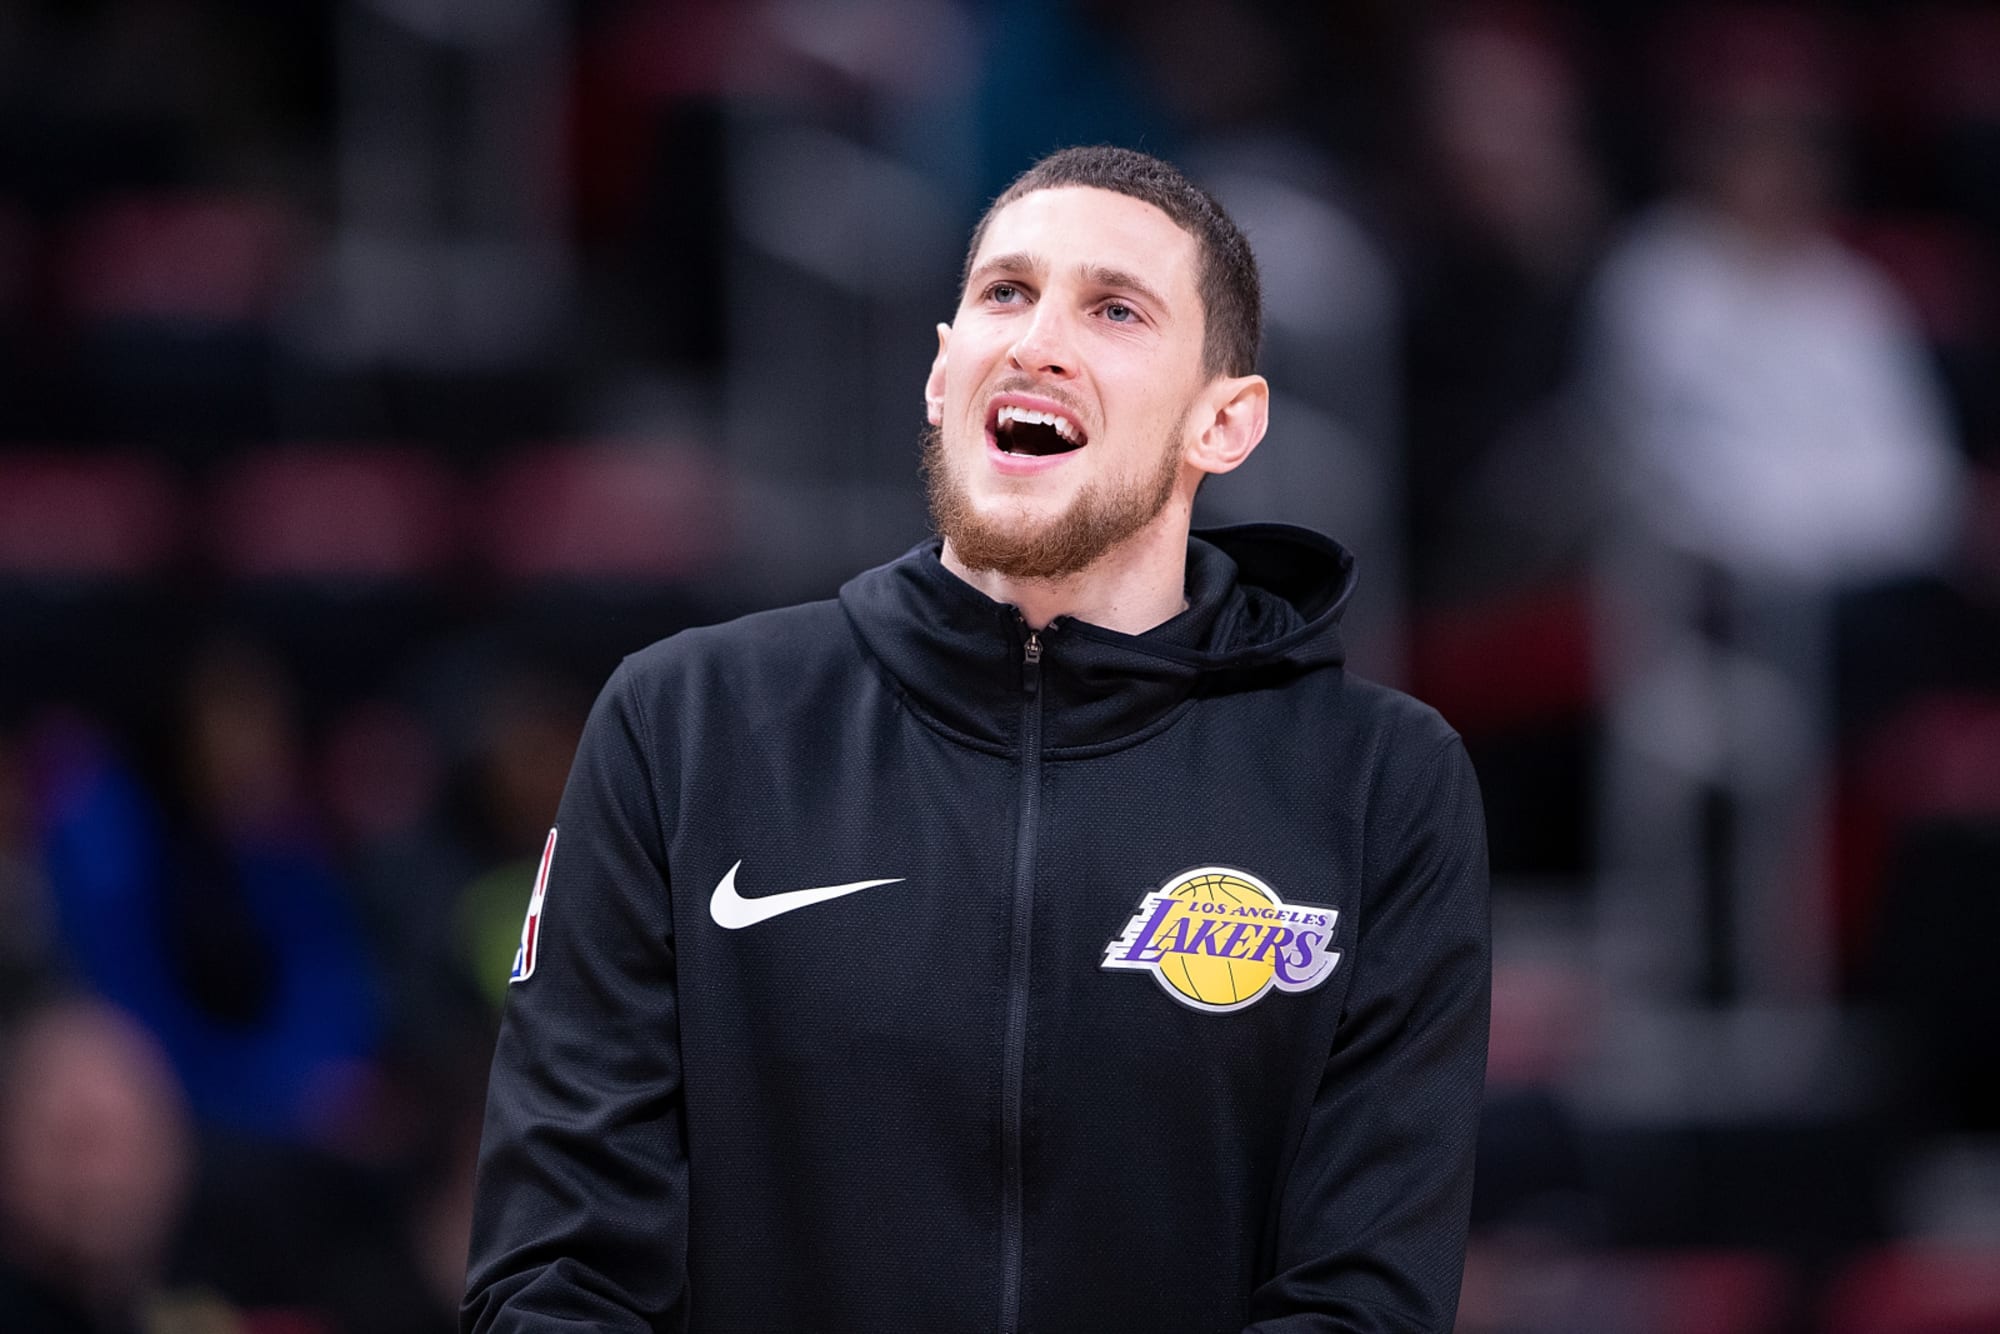 Okc Thunder Offers Opportunity For Mike Muscala To Be Big Fish In Free Agency In 2020